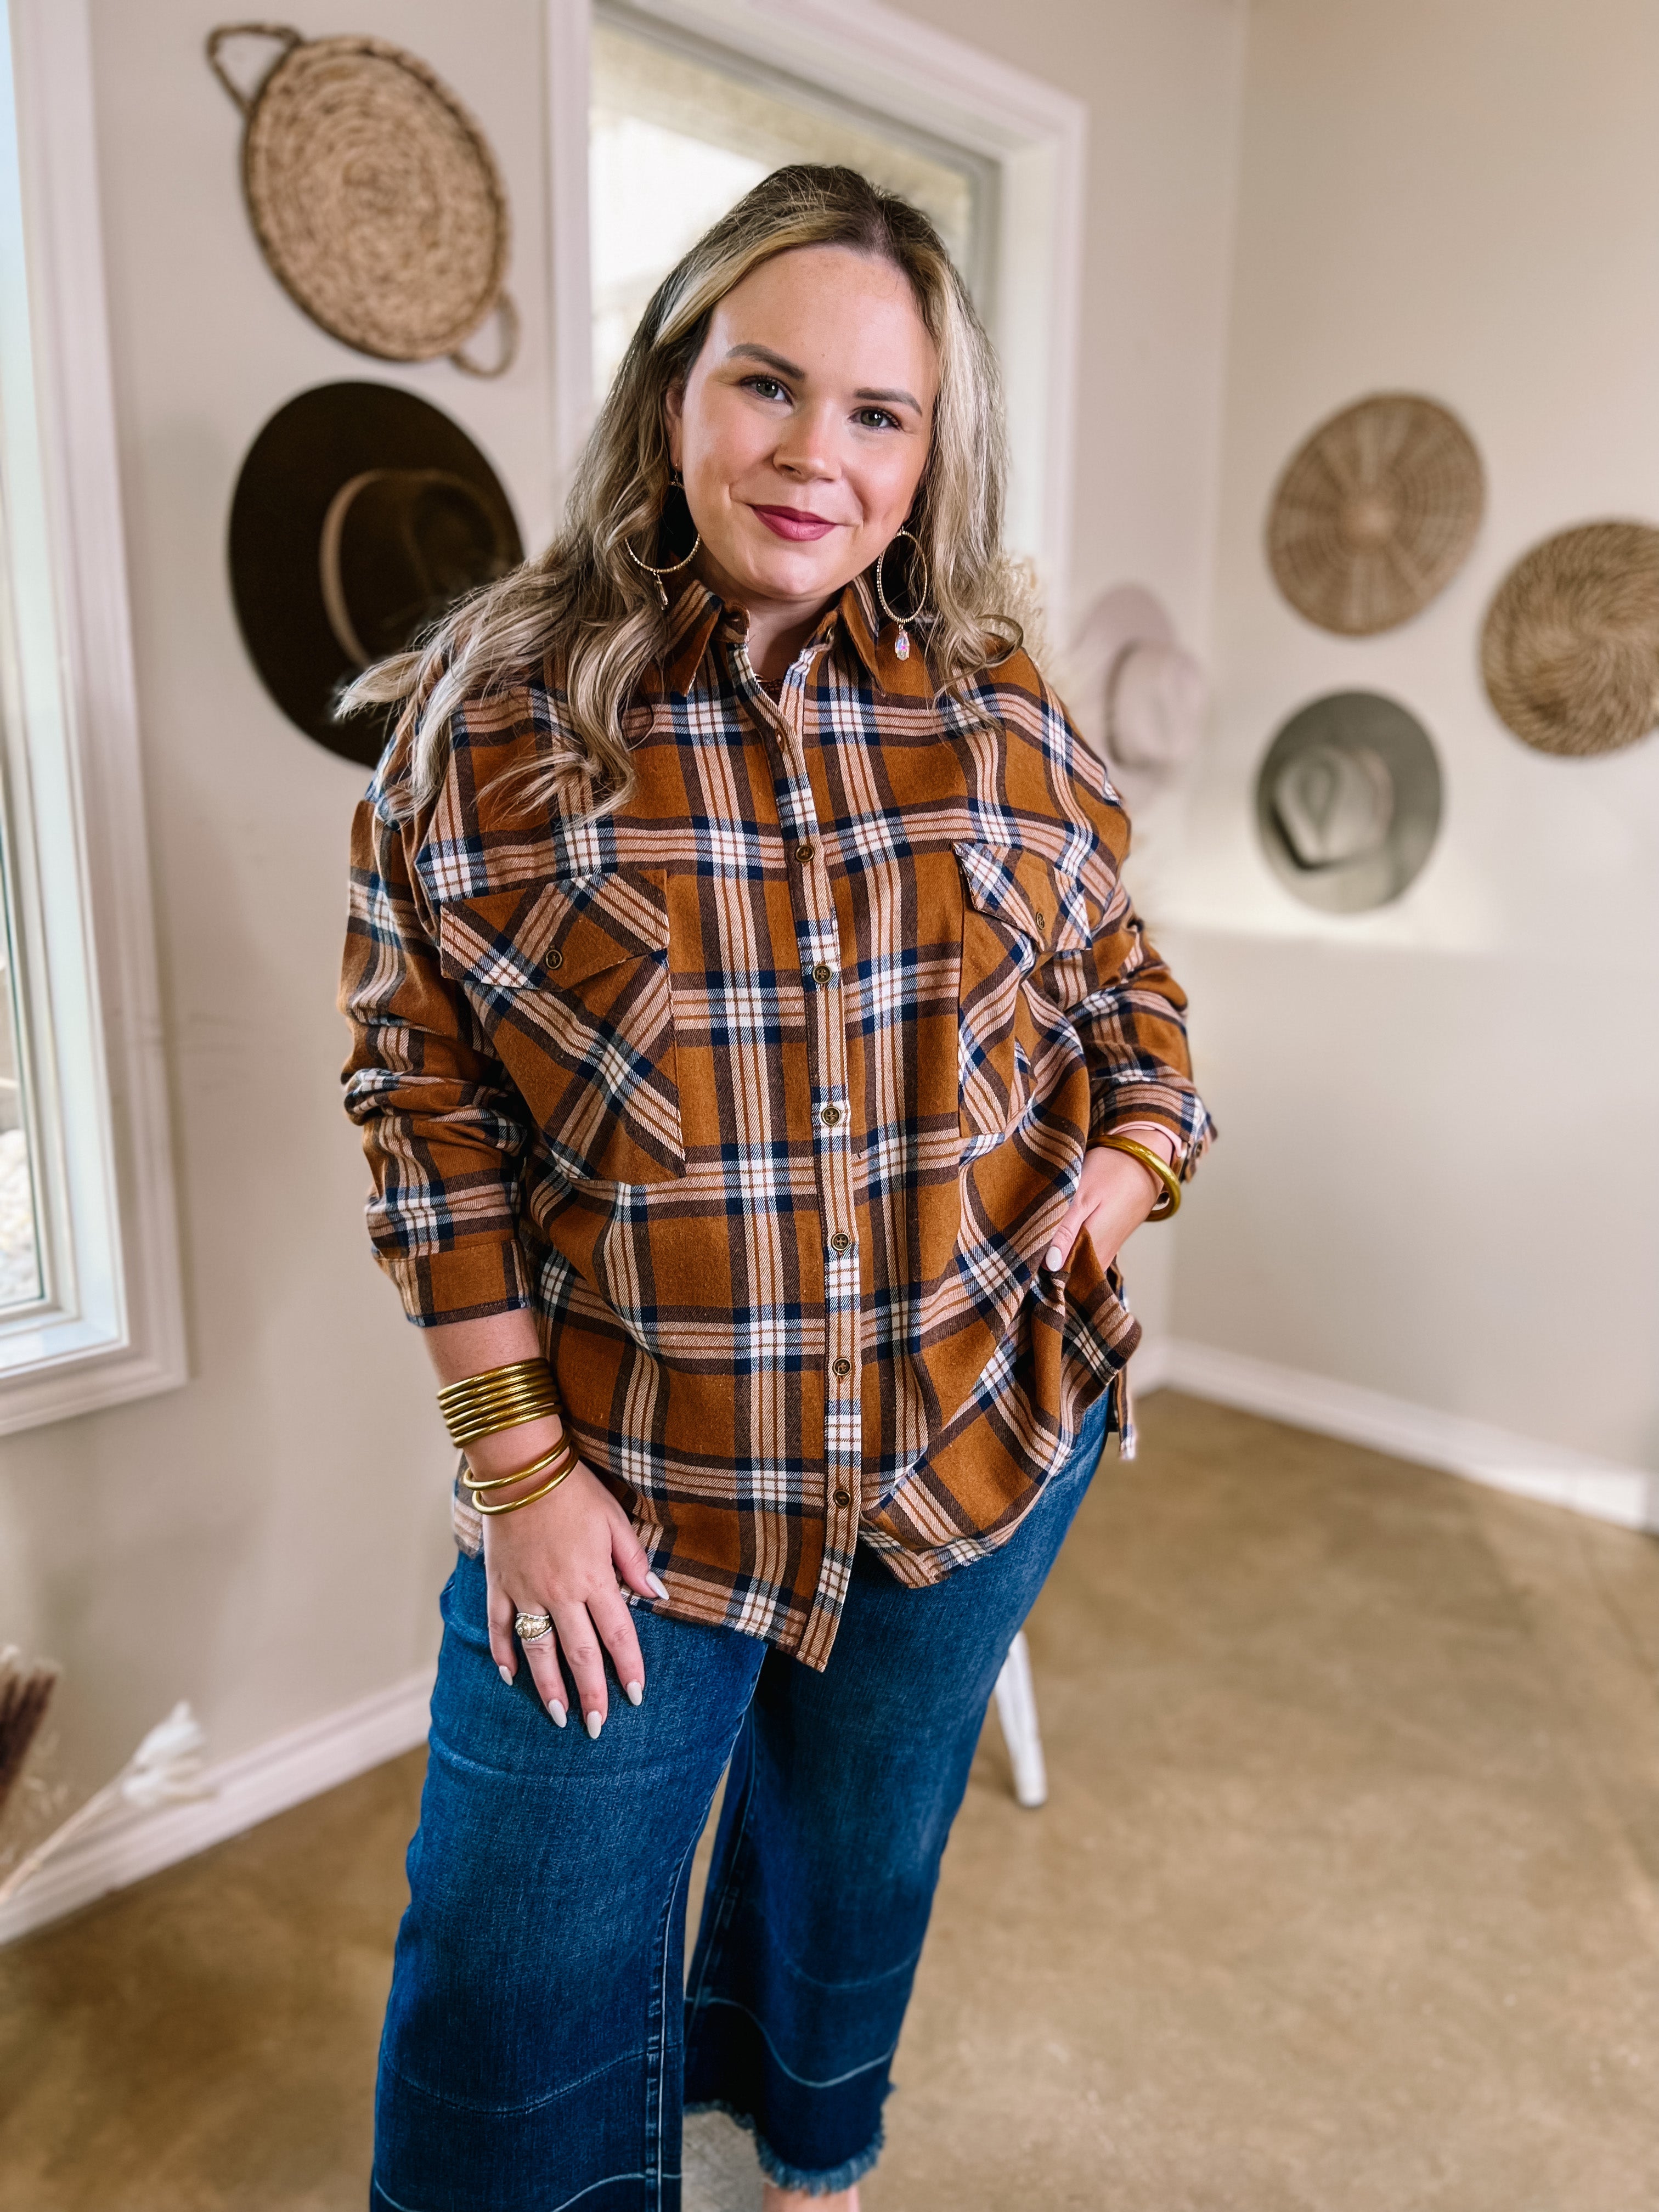 Cheery Mood Button Up Plaid Flannel Top in Camel Brown - Giddy Up Glamour Boutique